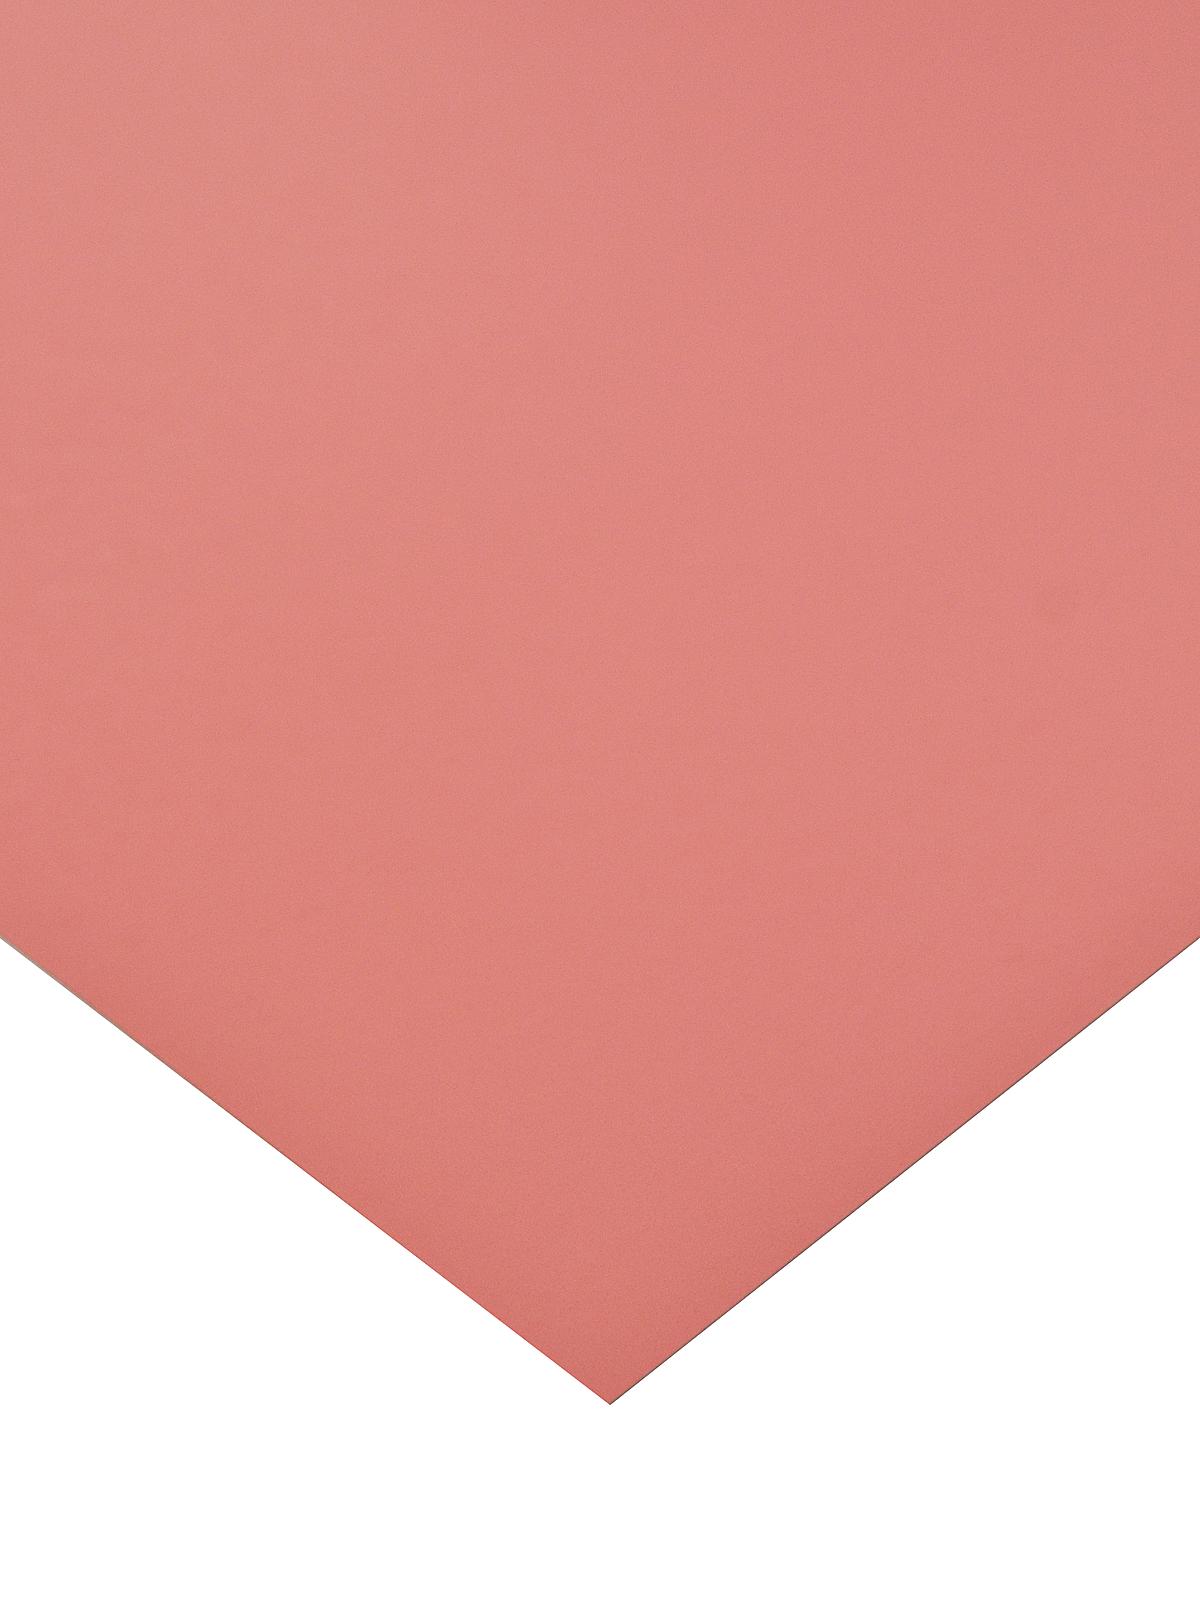 The Heavy Poster Board Pink